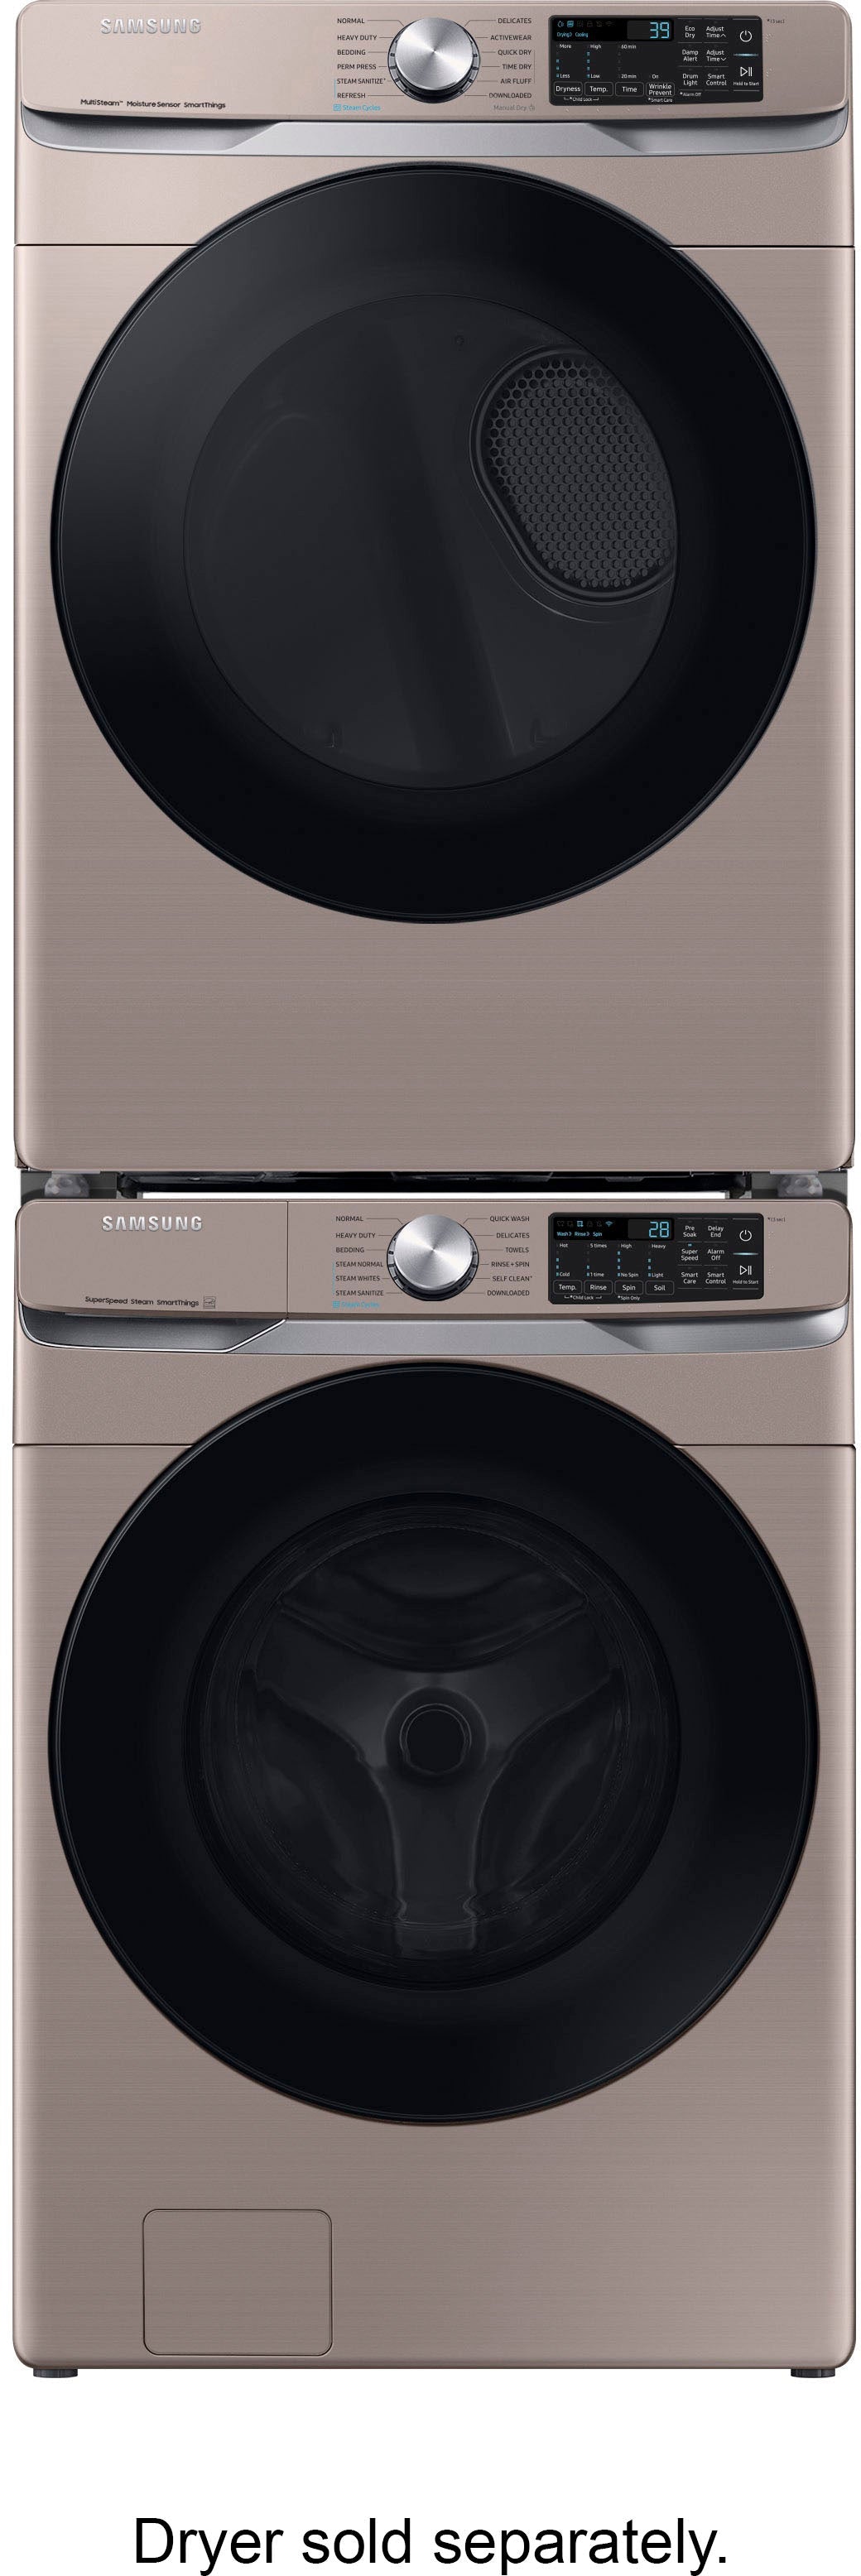 Samsung - 4.5 cu. ft. Large Capacity Smart Front Load Washer with Super Speed Wash - Champagne_2